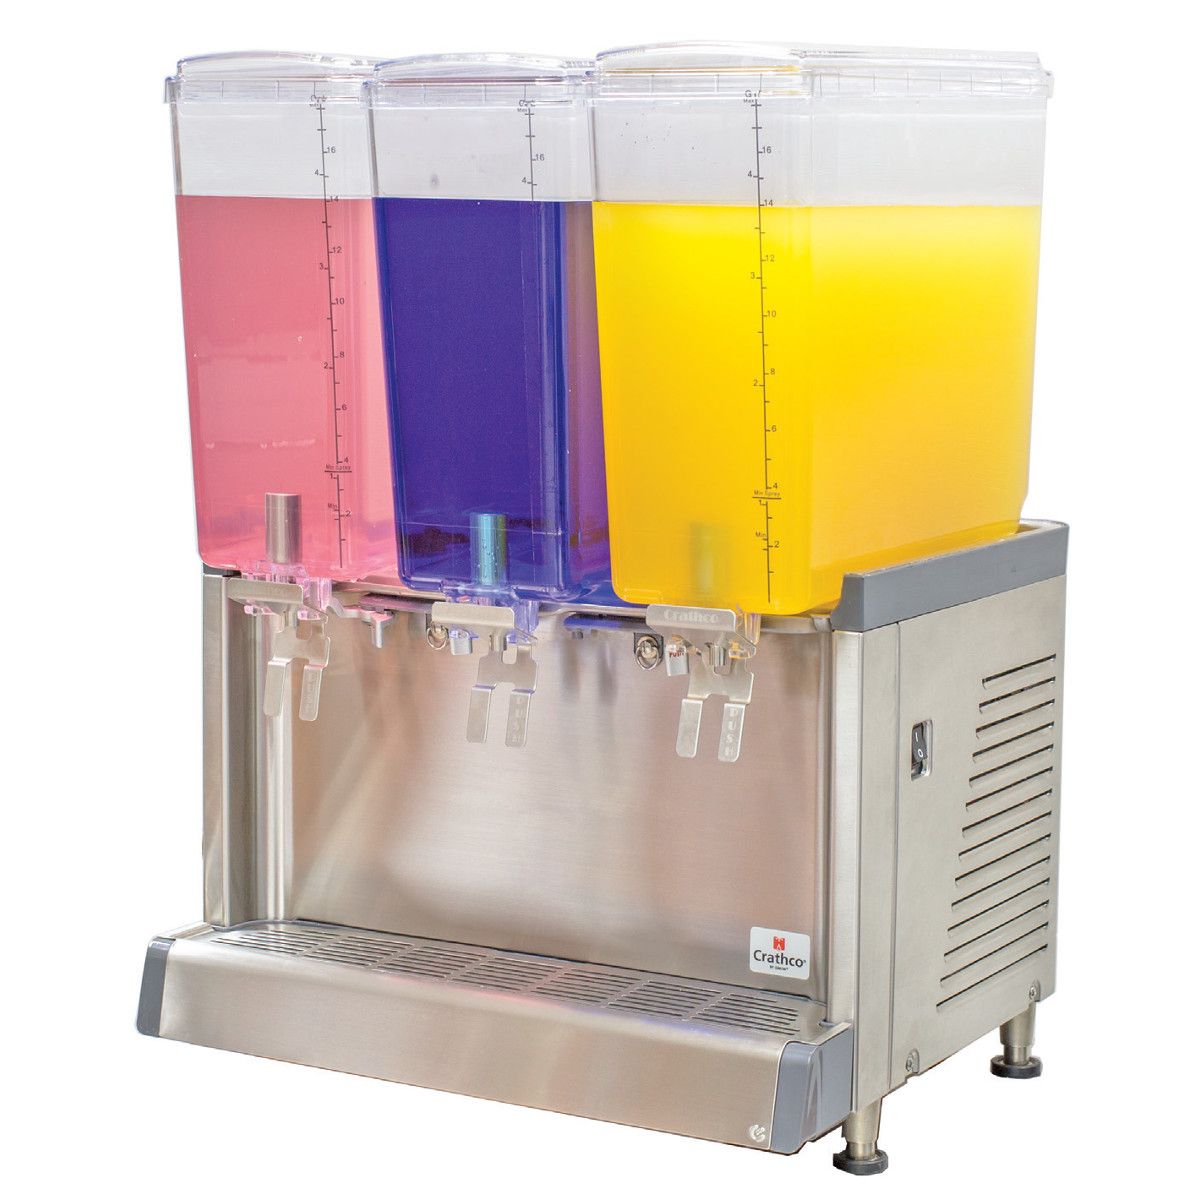 Triple Cold Beverage Dispenser with Stand